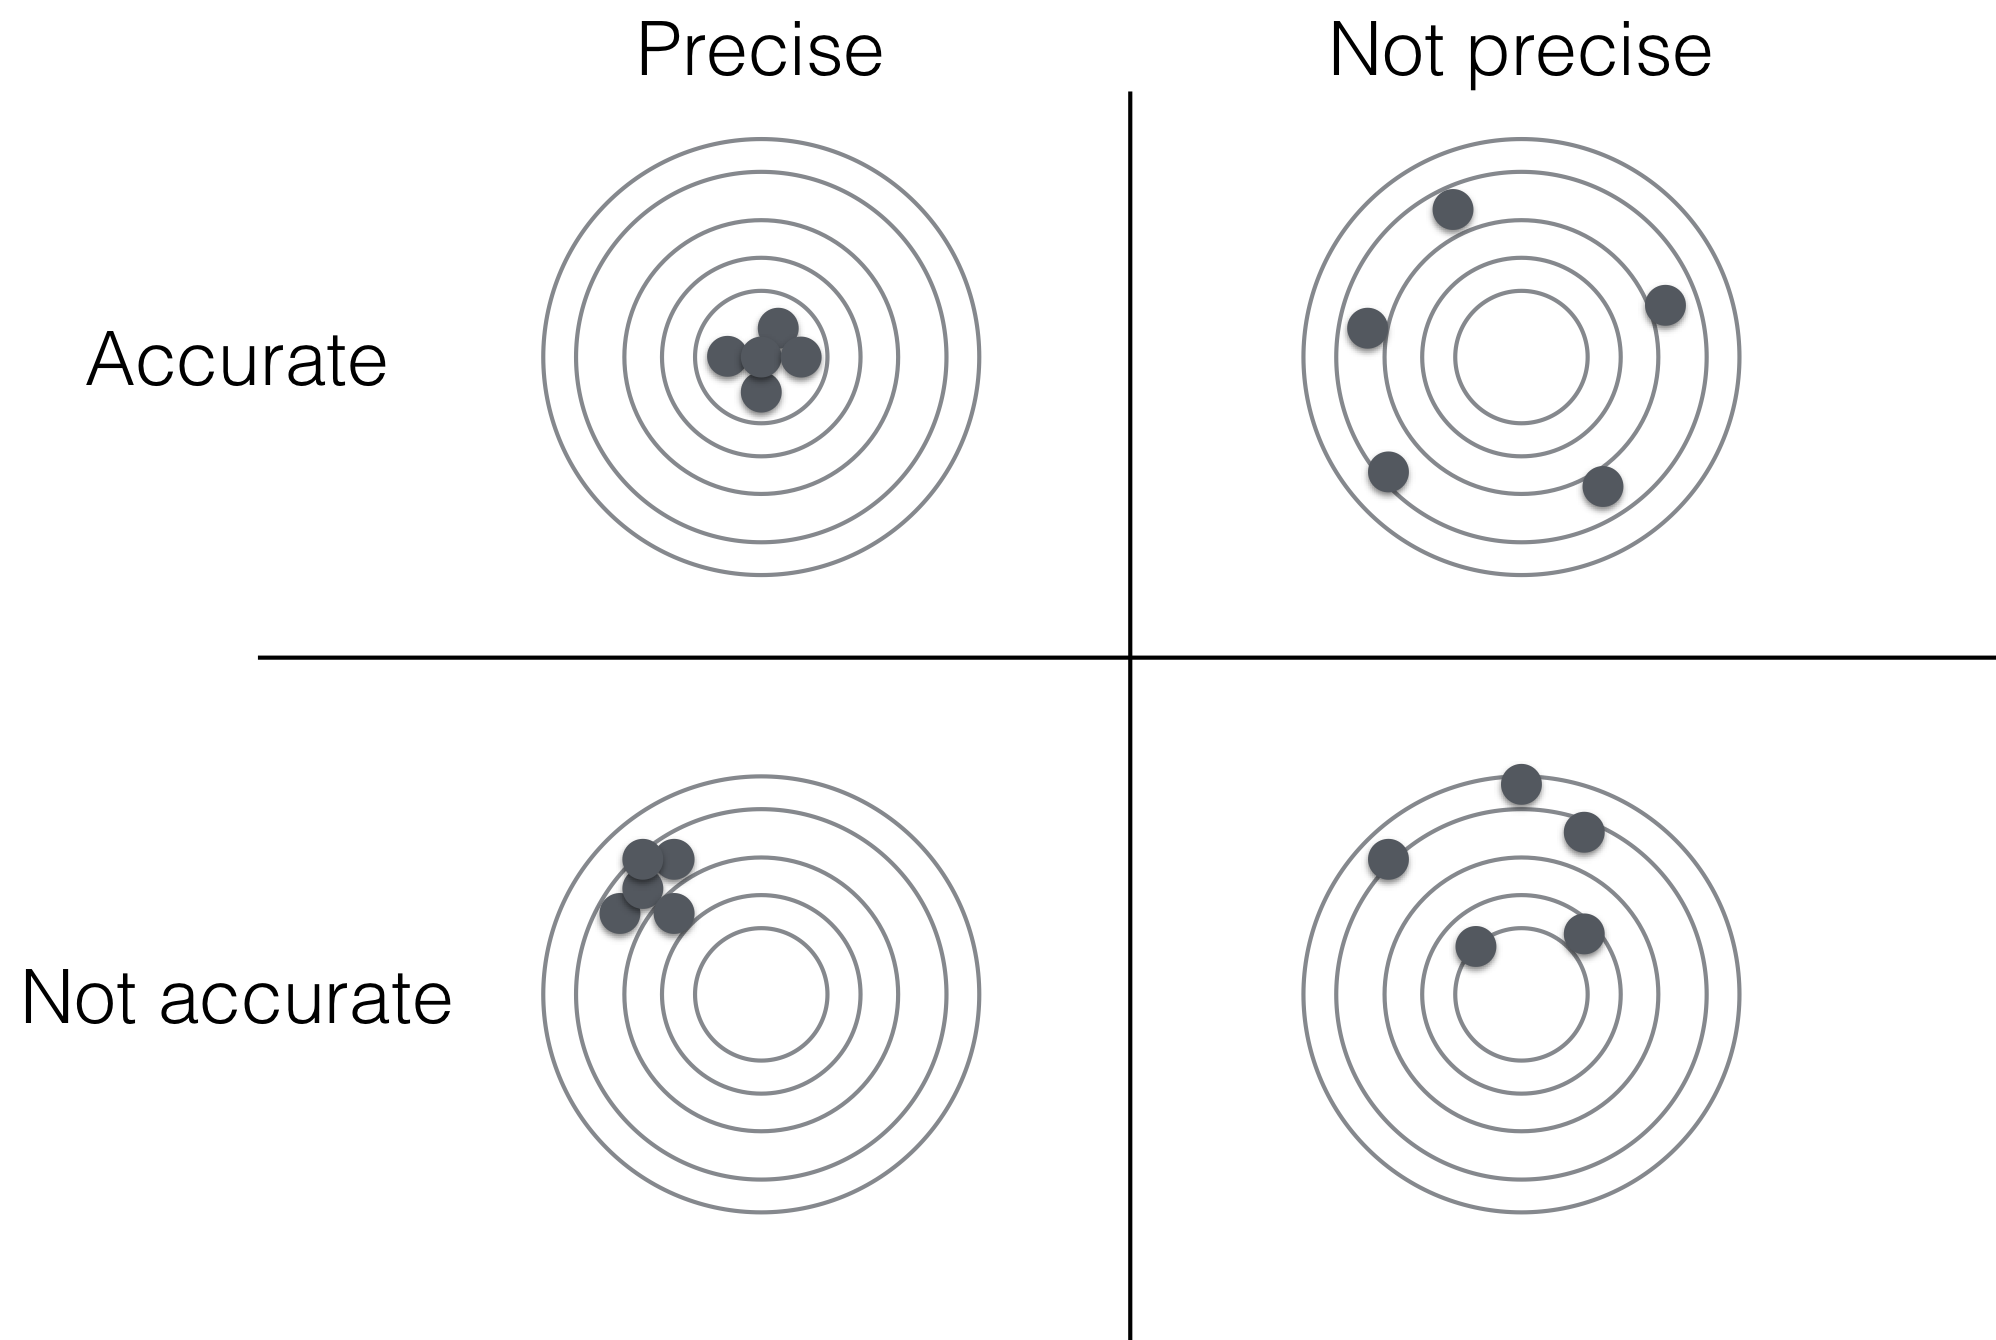 Accuracy and precision of an estimator.